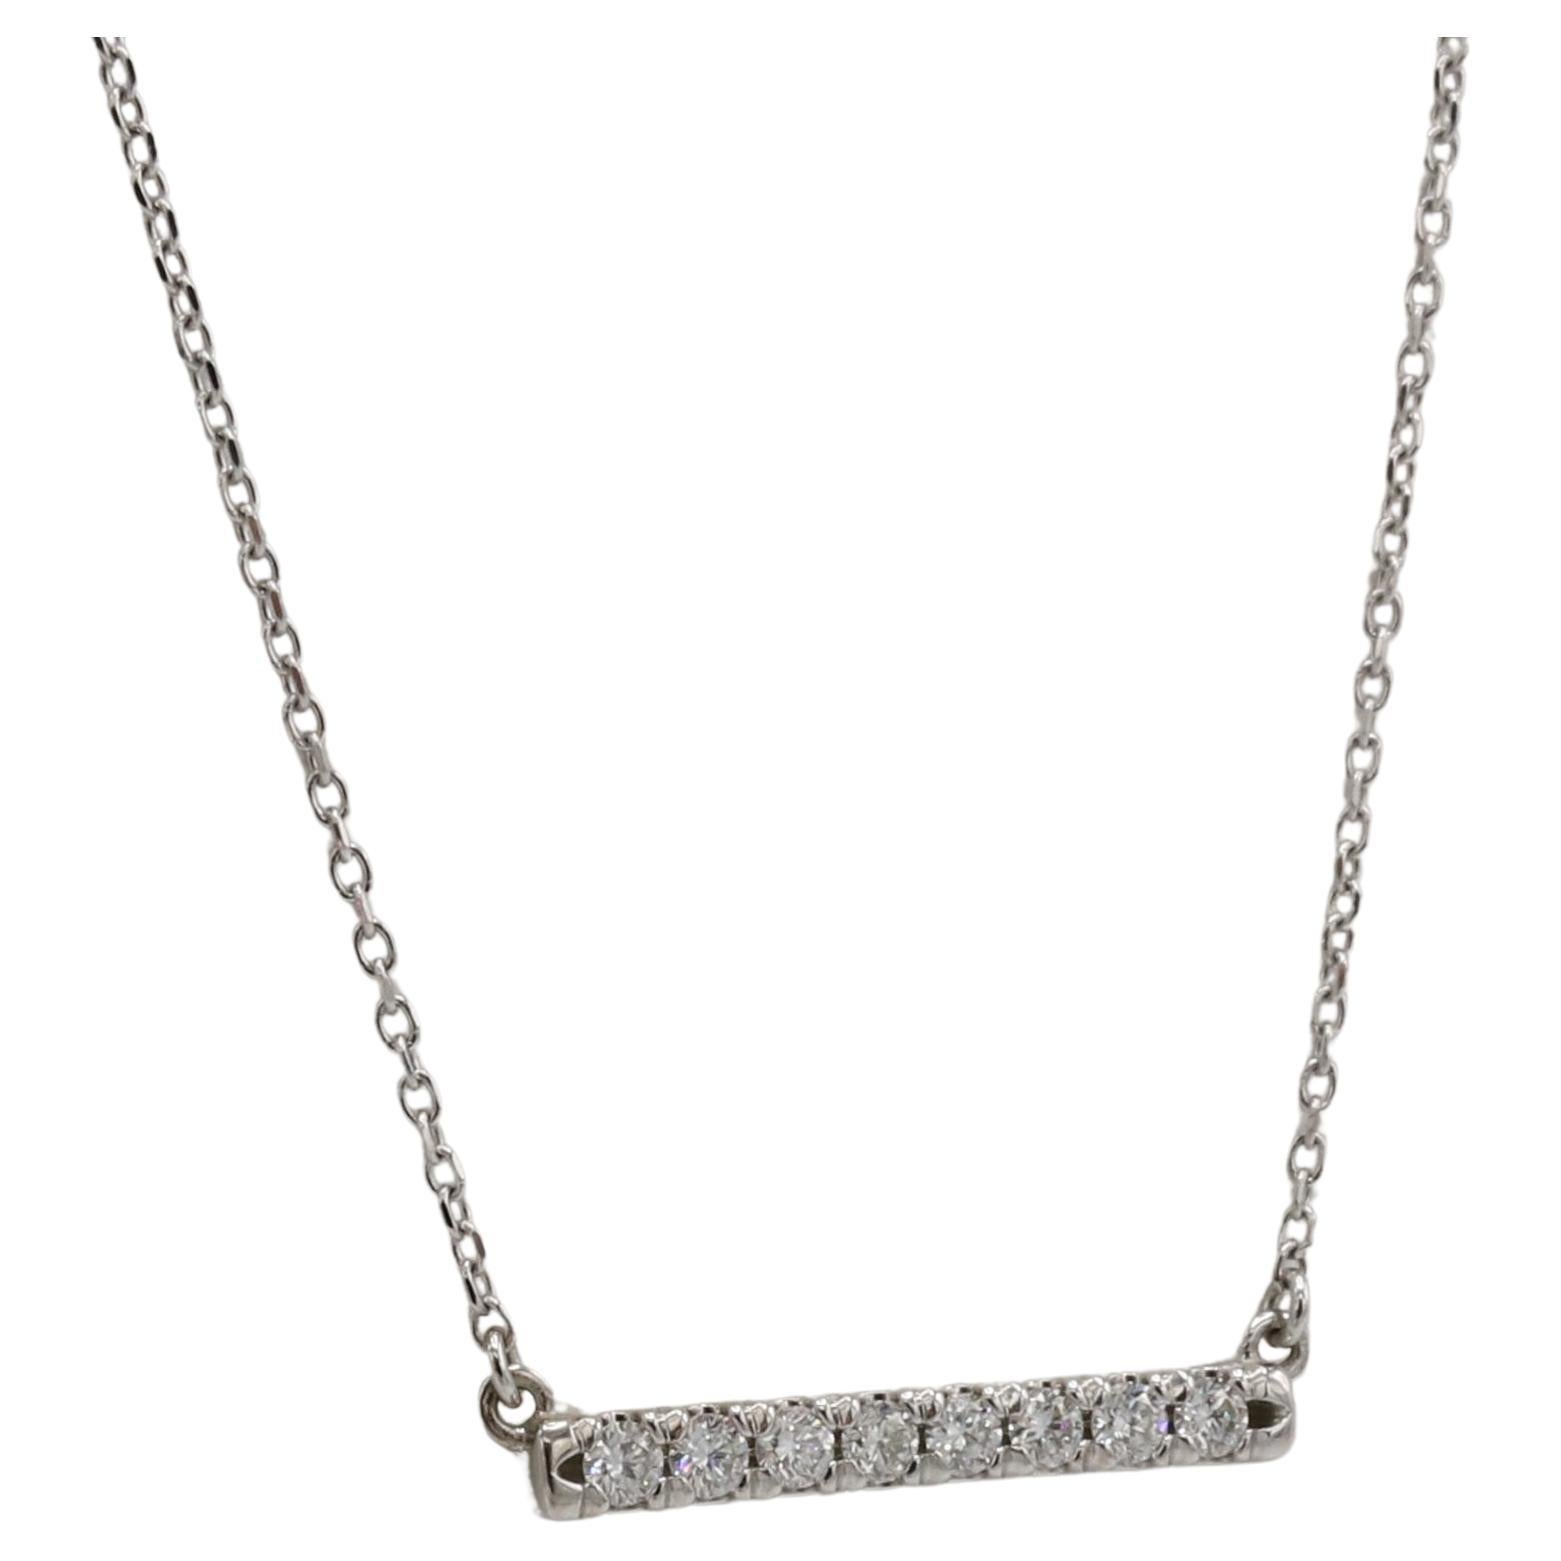 14K White Gold .25 Carat Natural Diamond French-Set Bar Necklace
Metal: 14k white gold
Weight: 1.86 grams
Diamonds. 0.25 carats G-H VS round diamonds
Bar: 19.5mm
Chain length: 16 inches
Note: Also available in yellow gold
